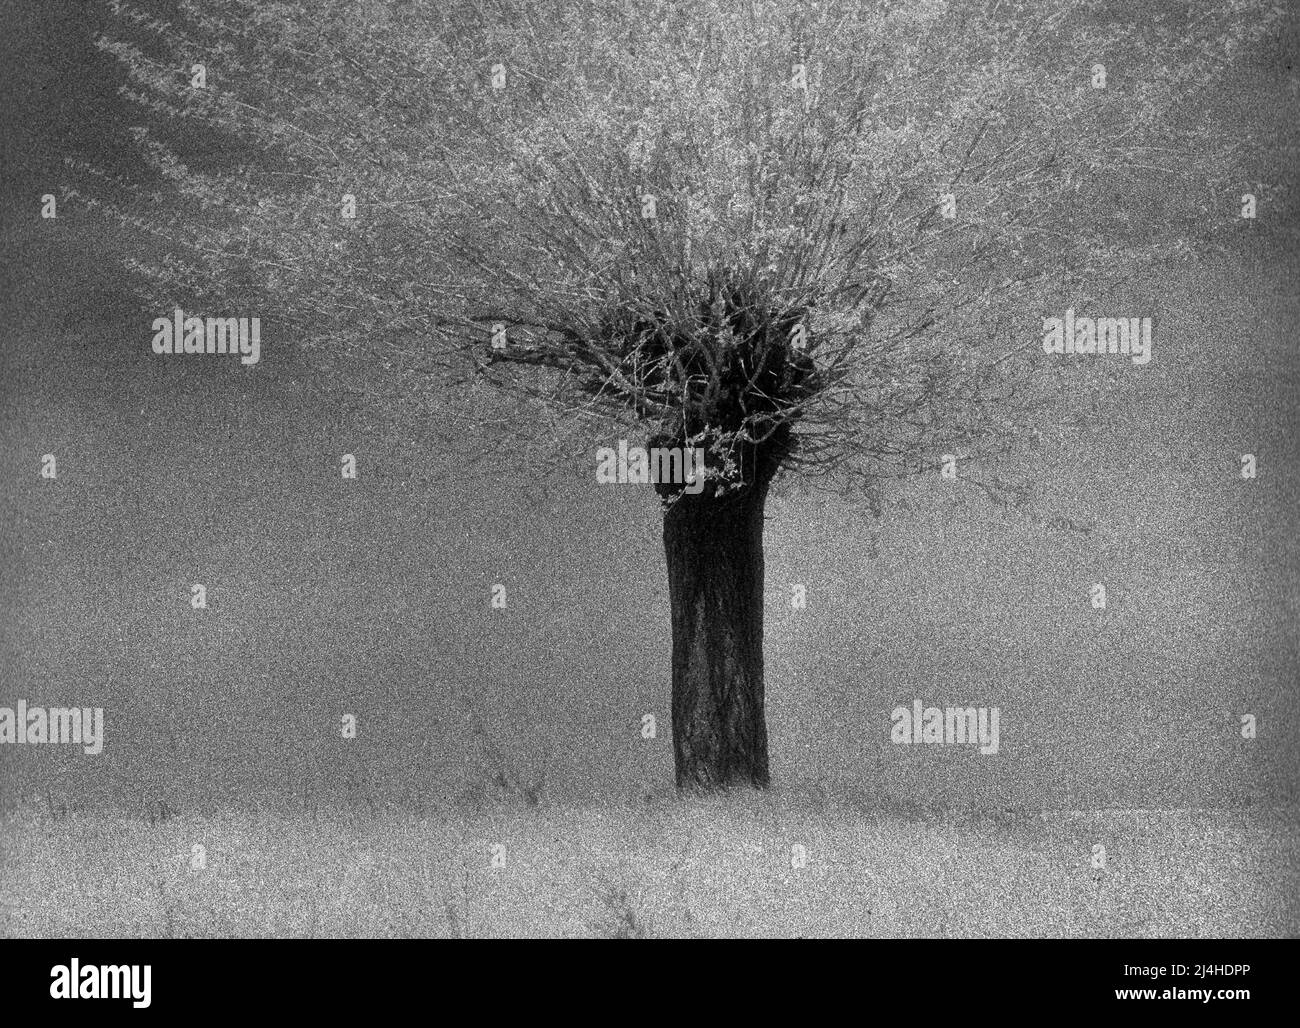 Monochrome infrared photograph of a mulberry tree in April. Scanned infrared photo from black and white negative film. Stock Photo